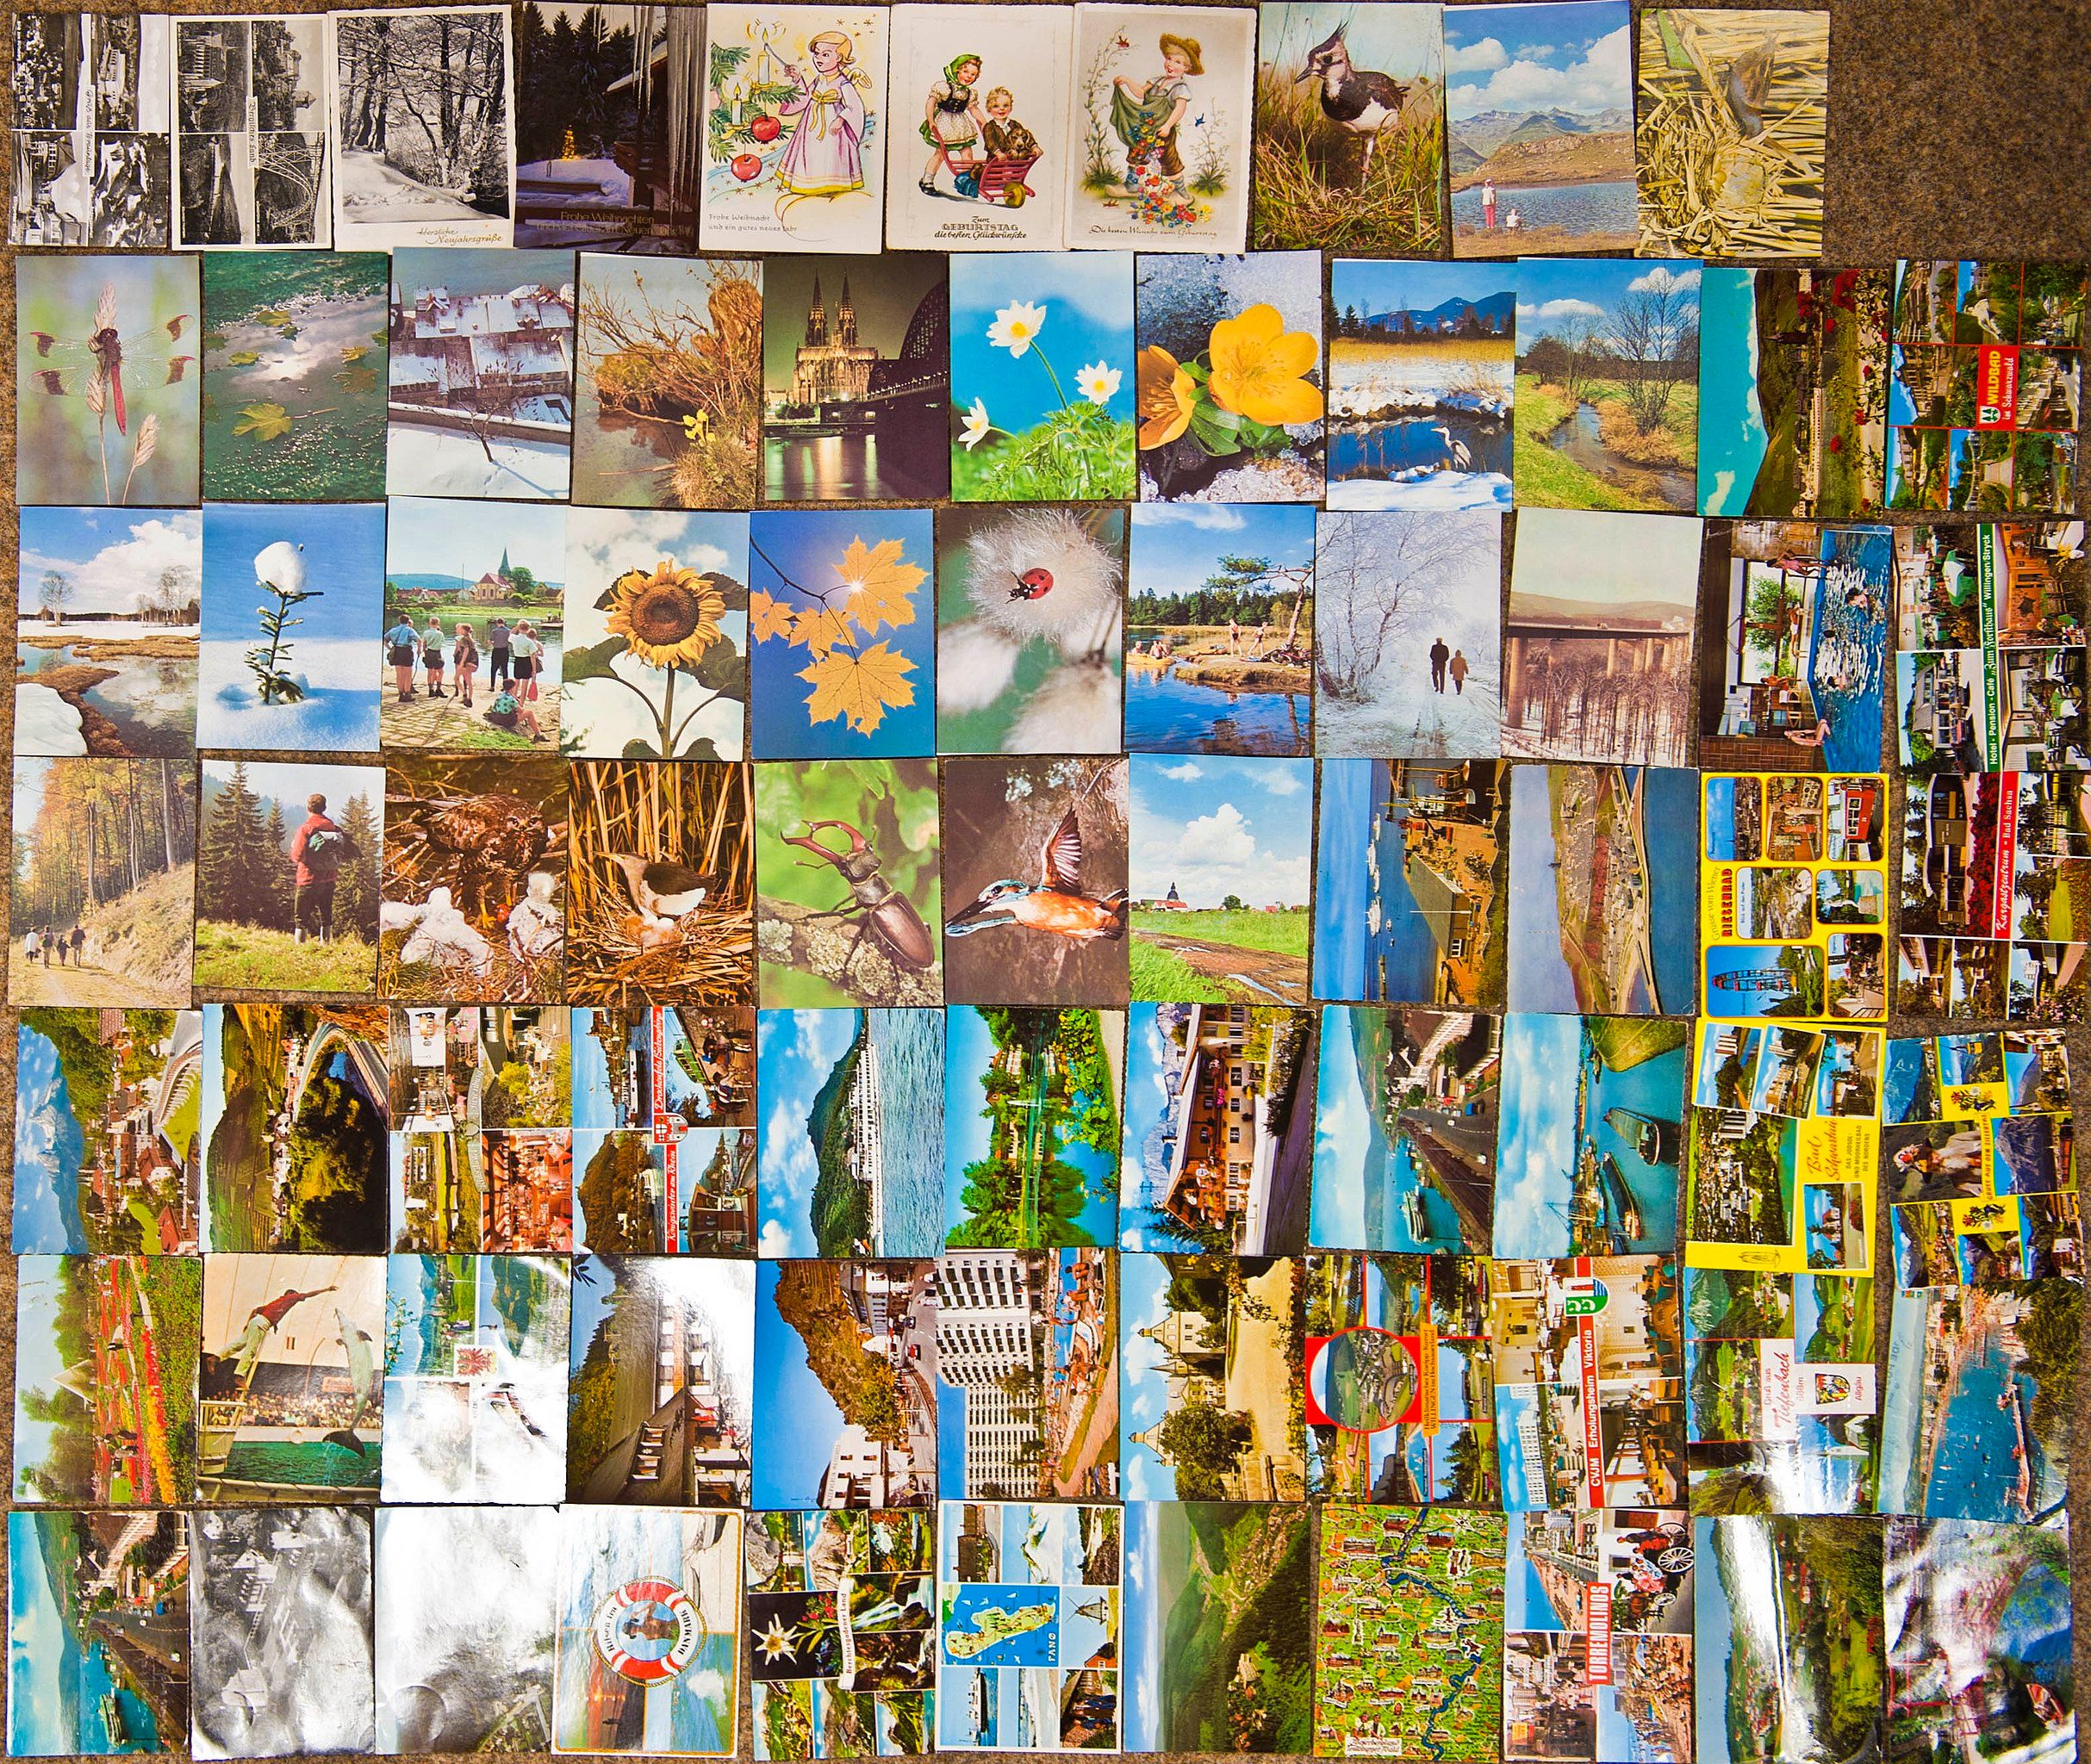 An 11 by 7 grid of vintage postcards showing wildlife, landscapes, and other illustrations.